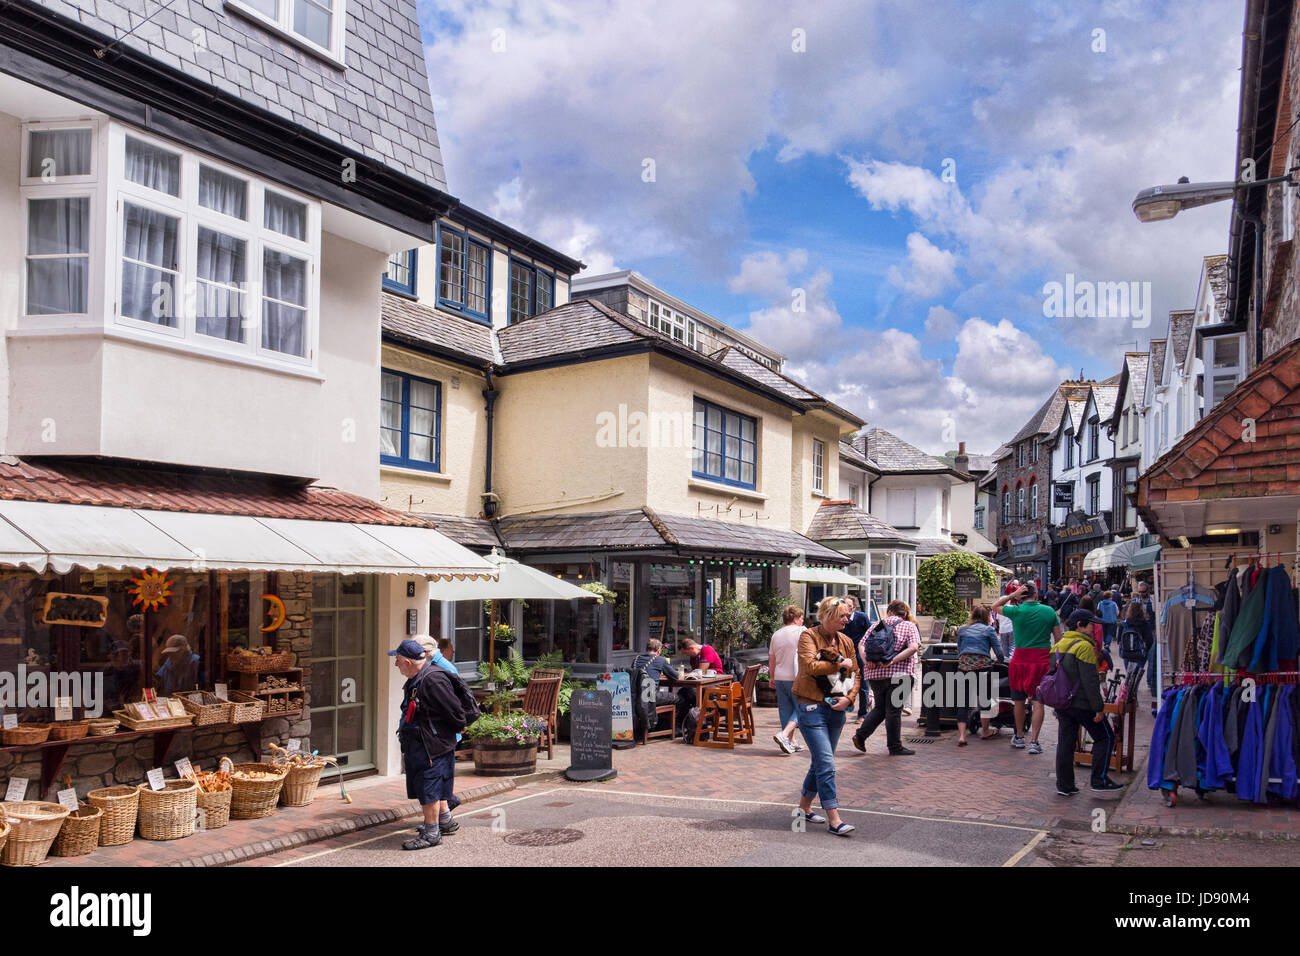 12 June 2017: Lynmouth, Devon, England, UK - Crowds shopping in busy Lynmouth Street. Stock Photo